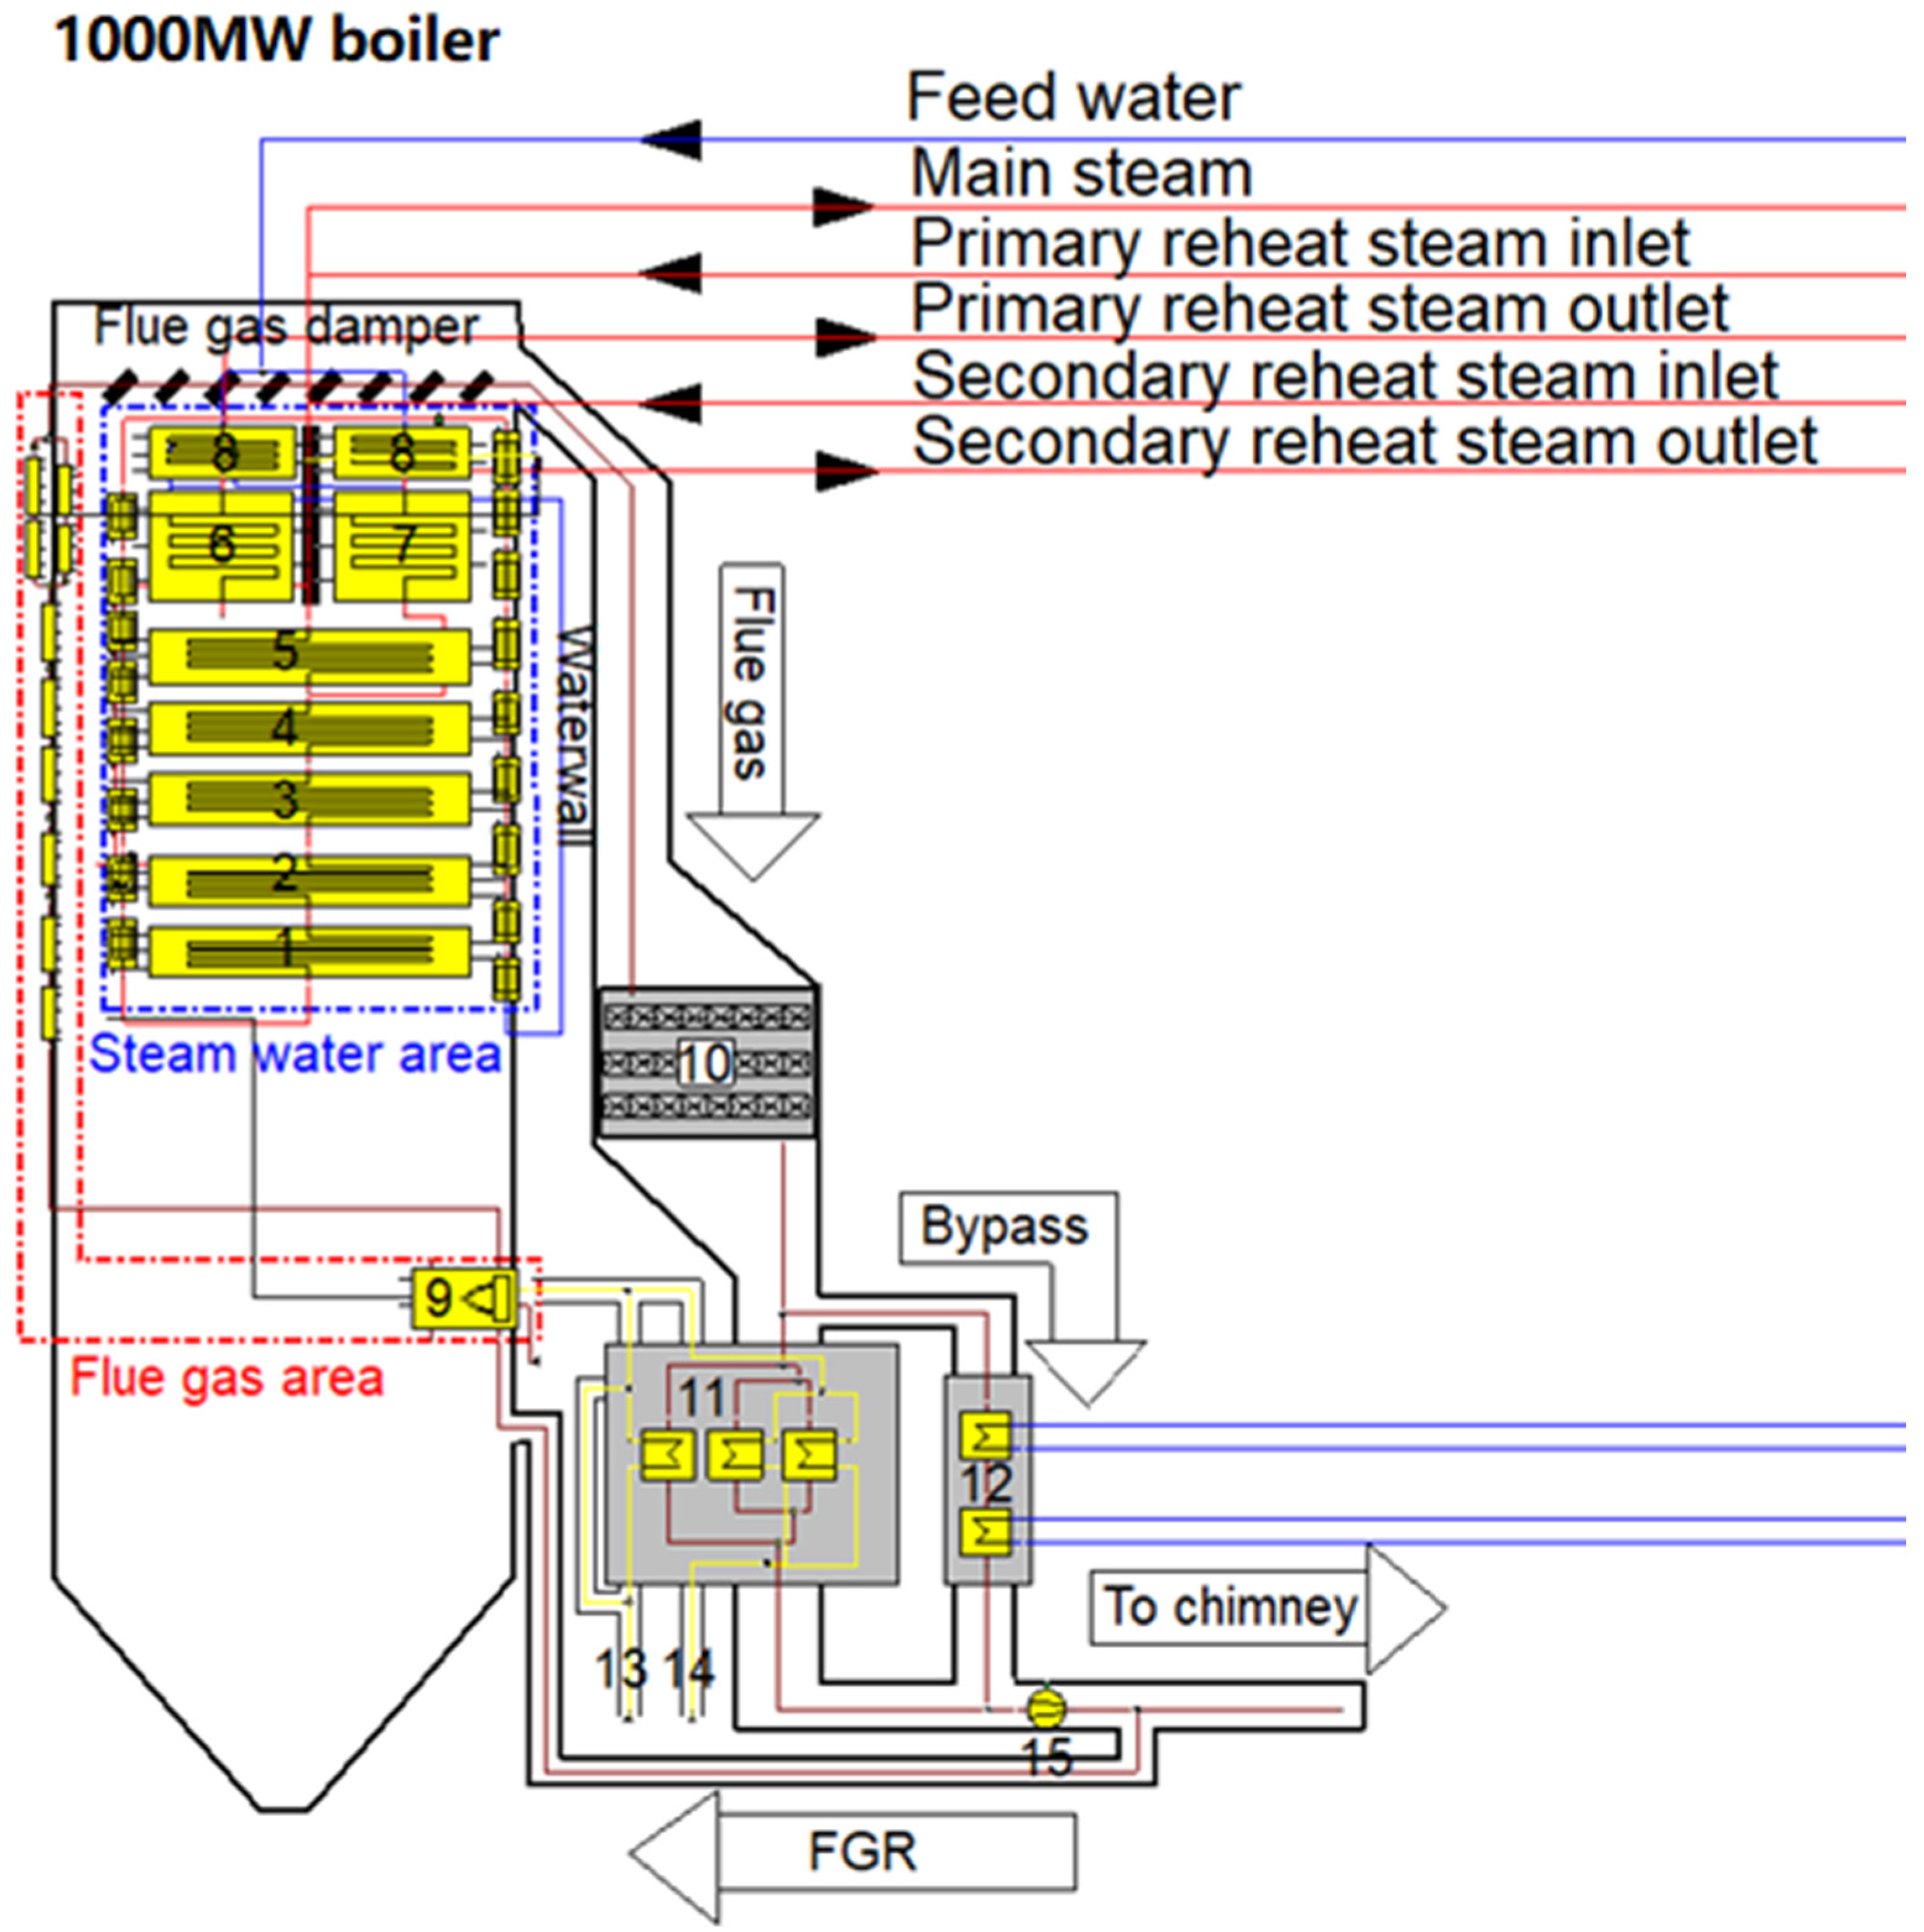 Cold Feedwater Consequences for Steam Boilers